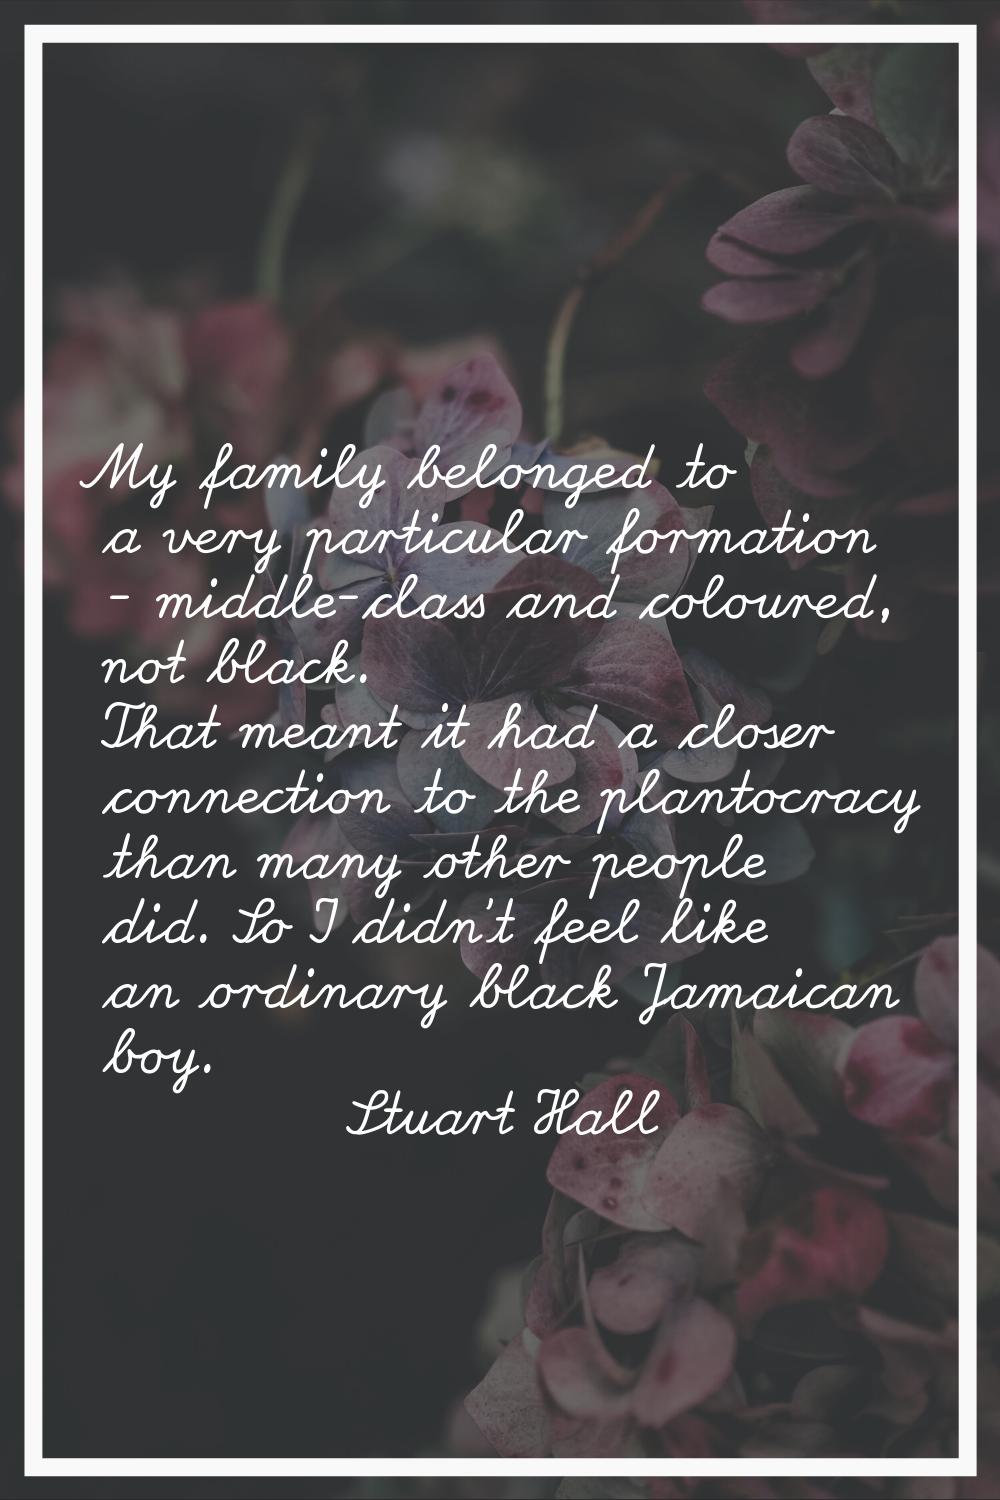 My family belonged to a very particular formation - middle-class and coloured, not black. That mean